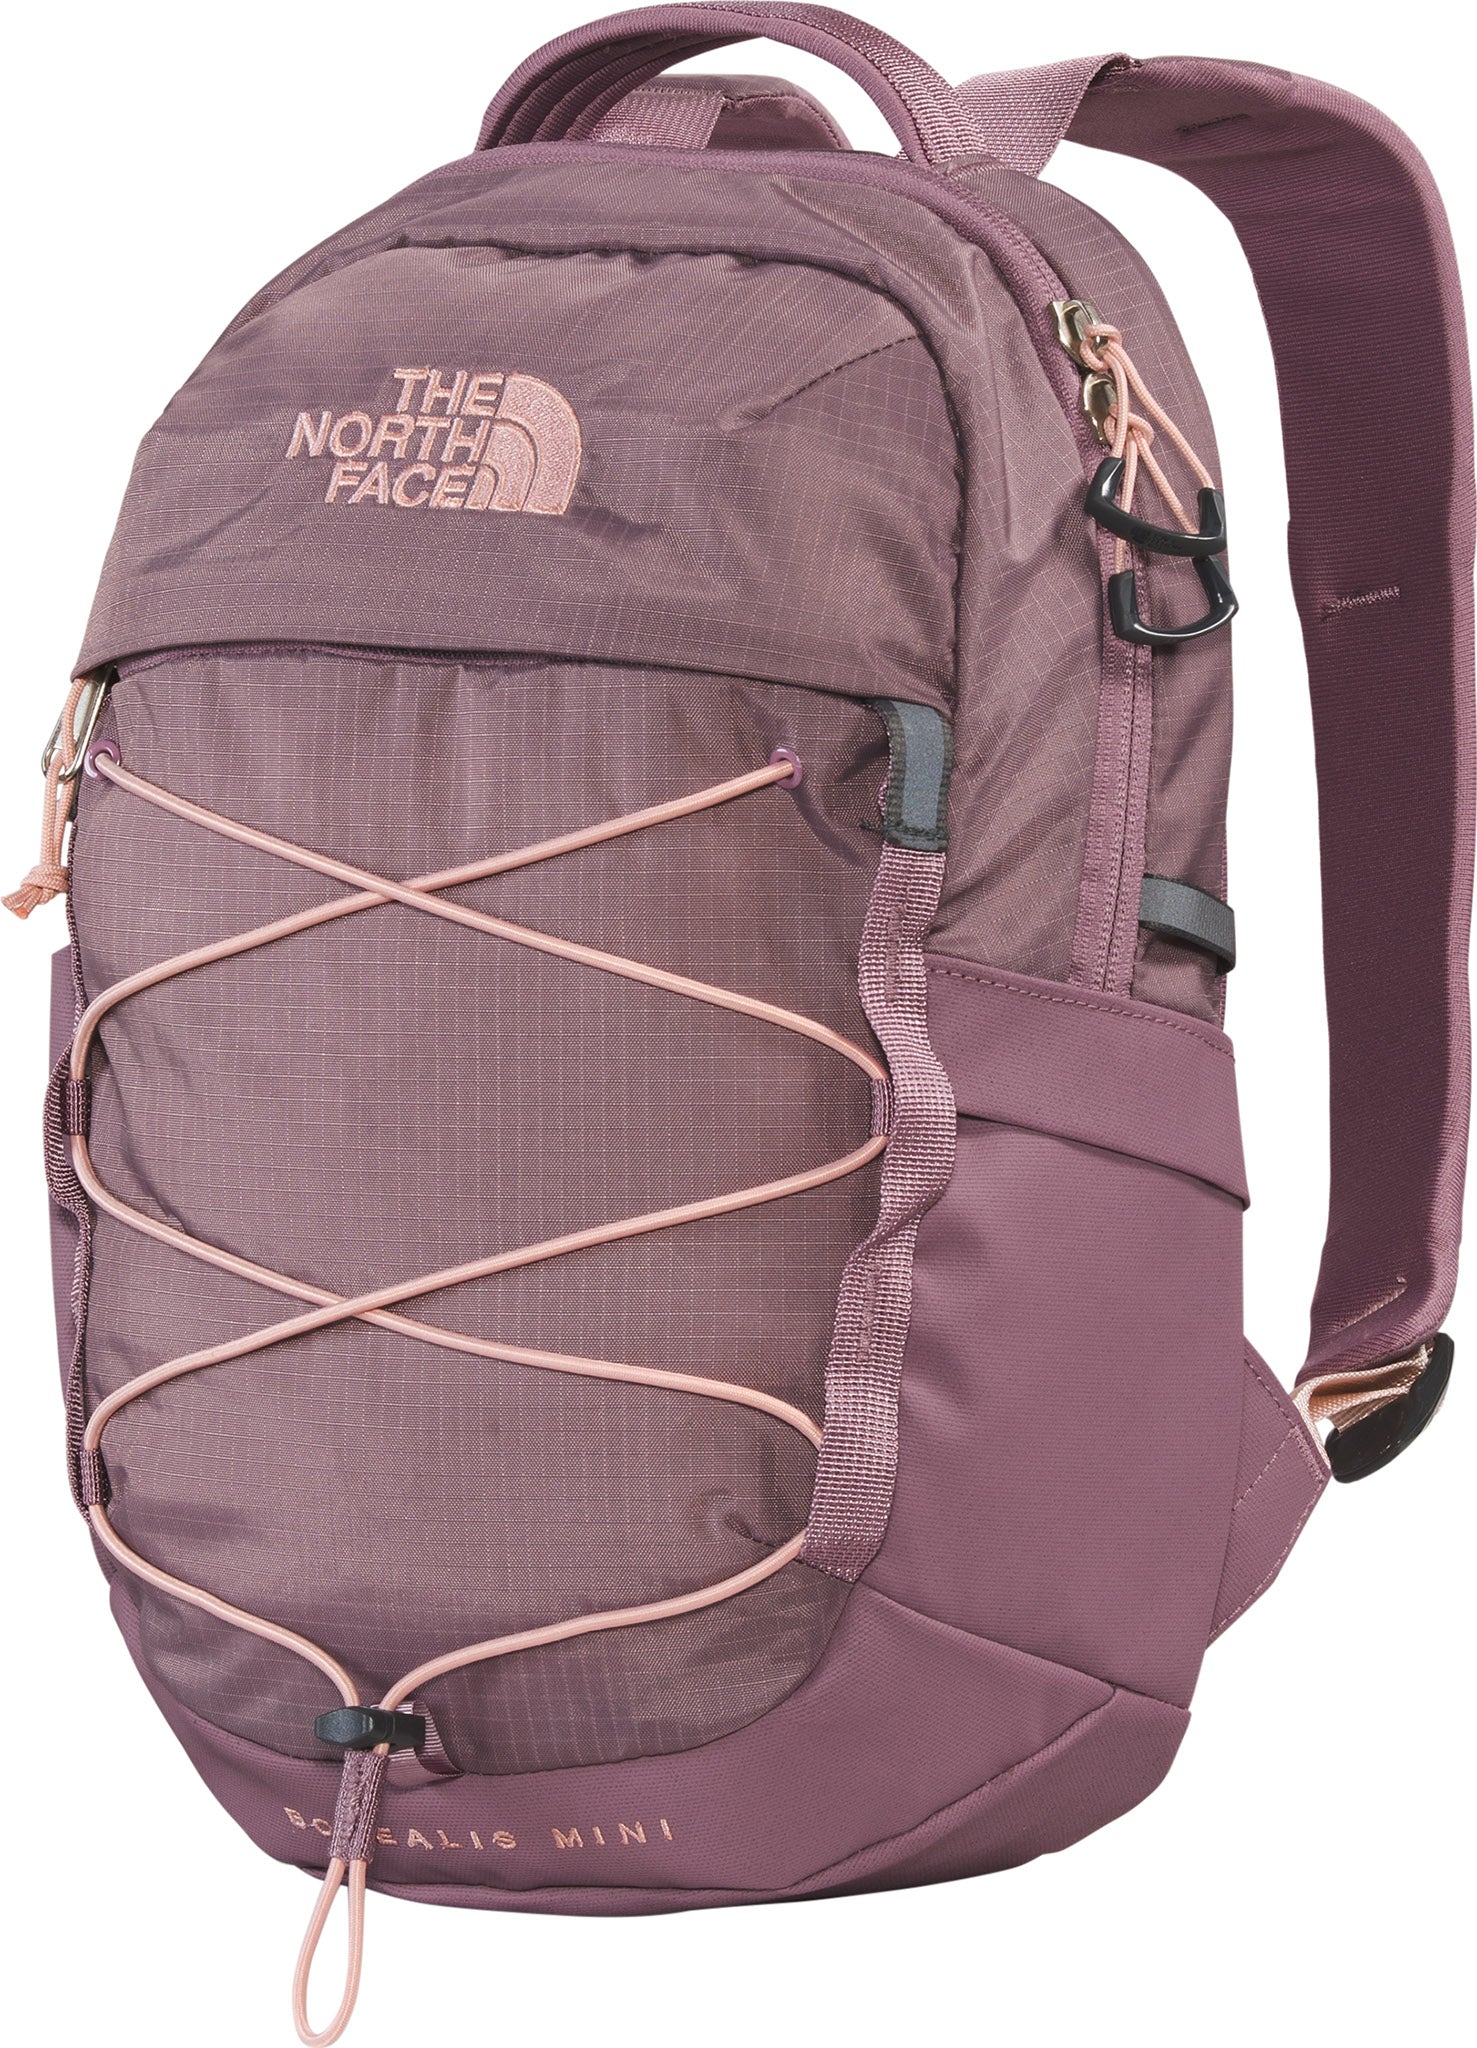 NORTH FACE back pack